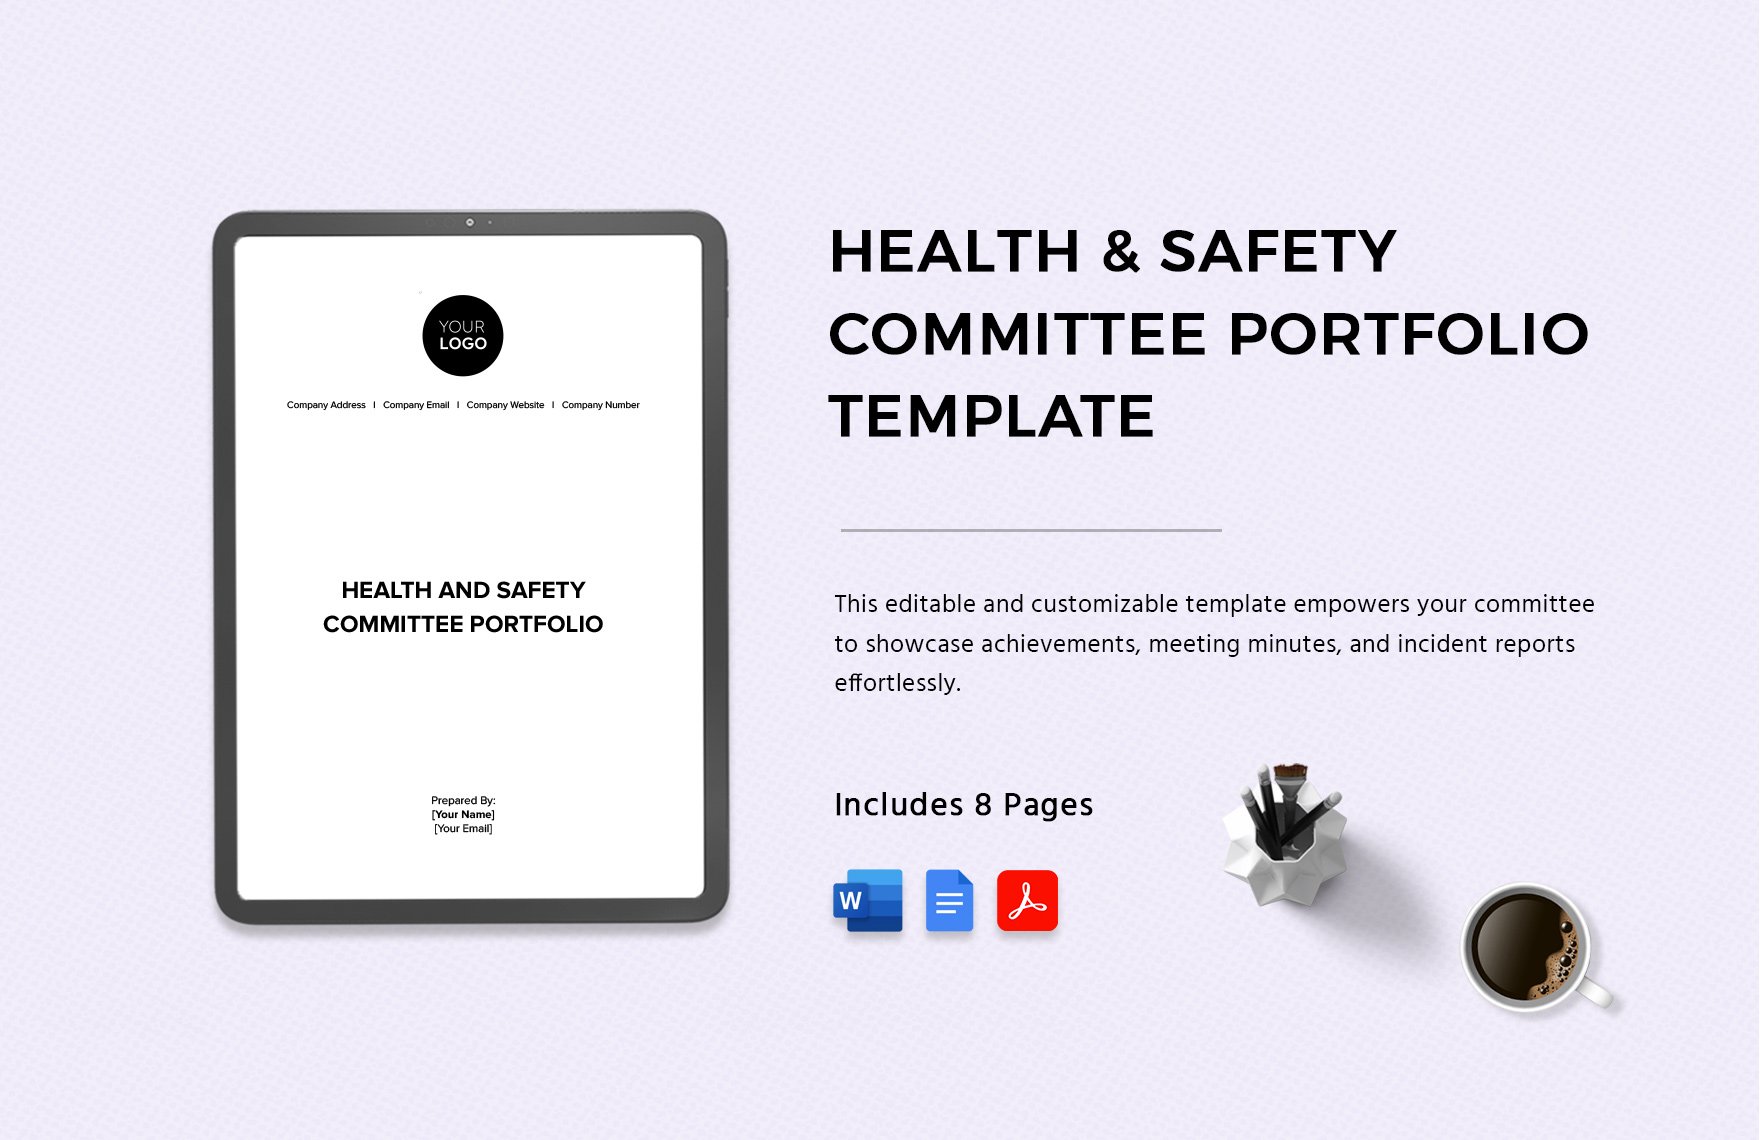 Health & Safety Committee Portfolio Template